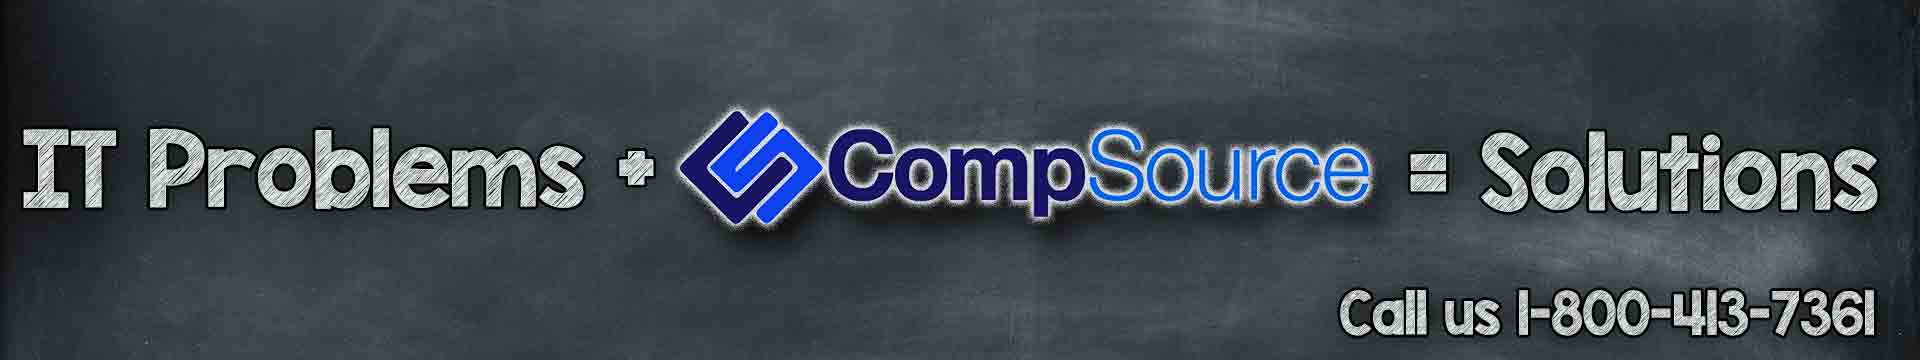 CompSource Solutions